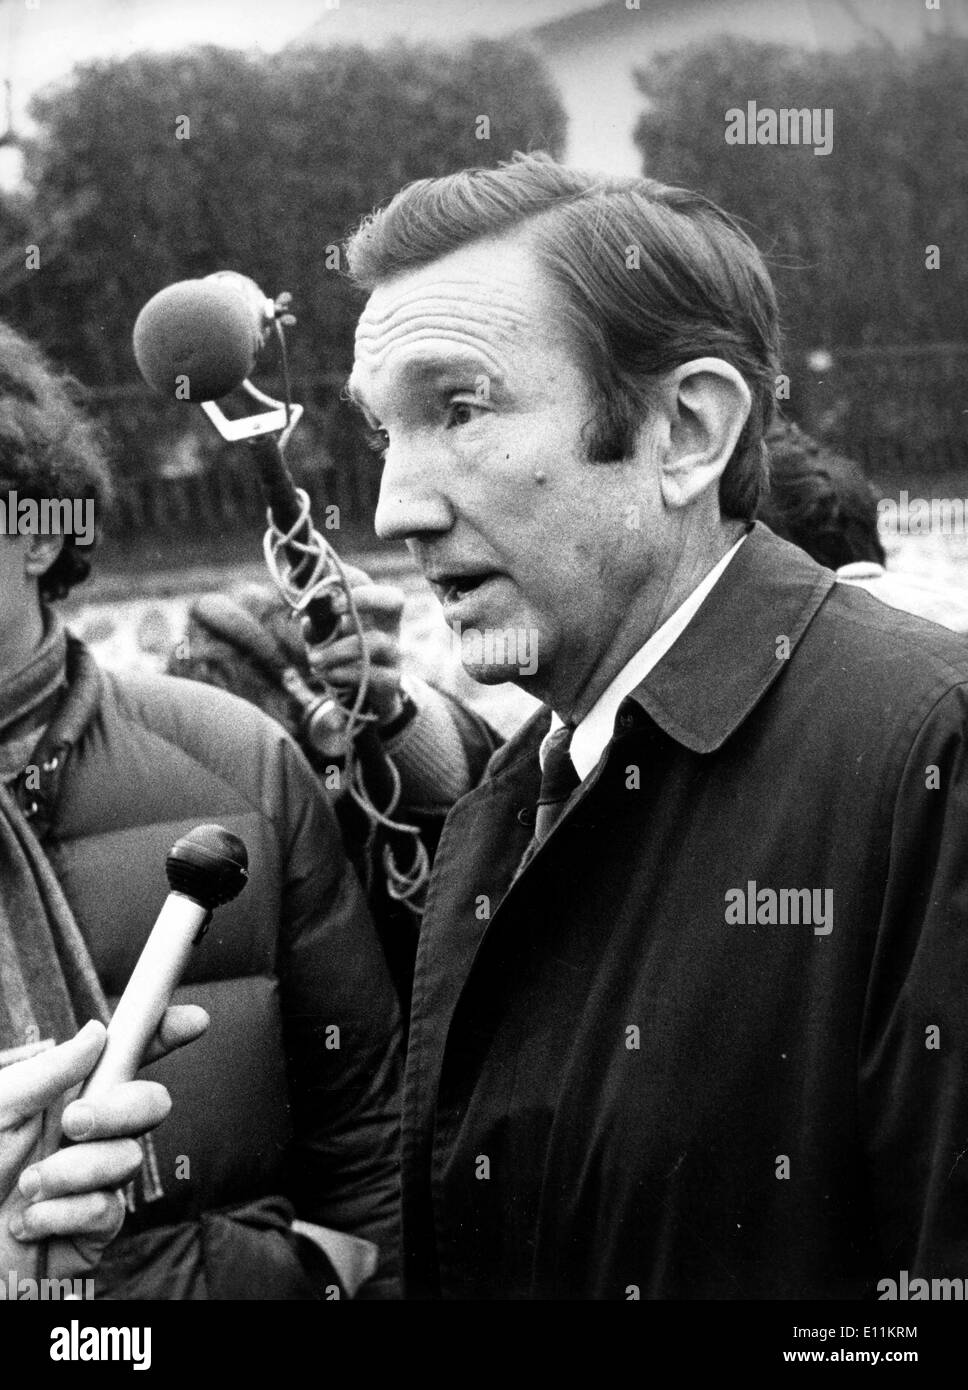 Jan 01, 1979 - Paris, France - (File Photo) William RAMSEY CLARK is a lawyer, and was United States Attorney General in the Stock Photo